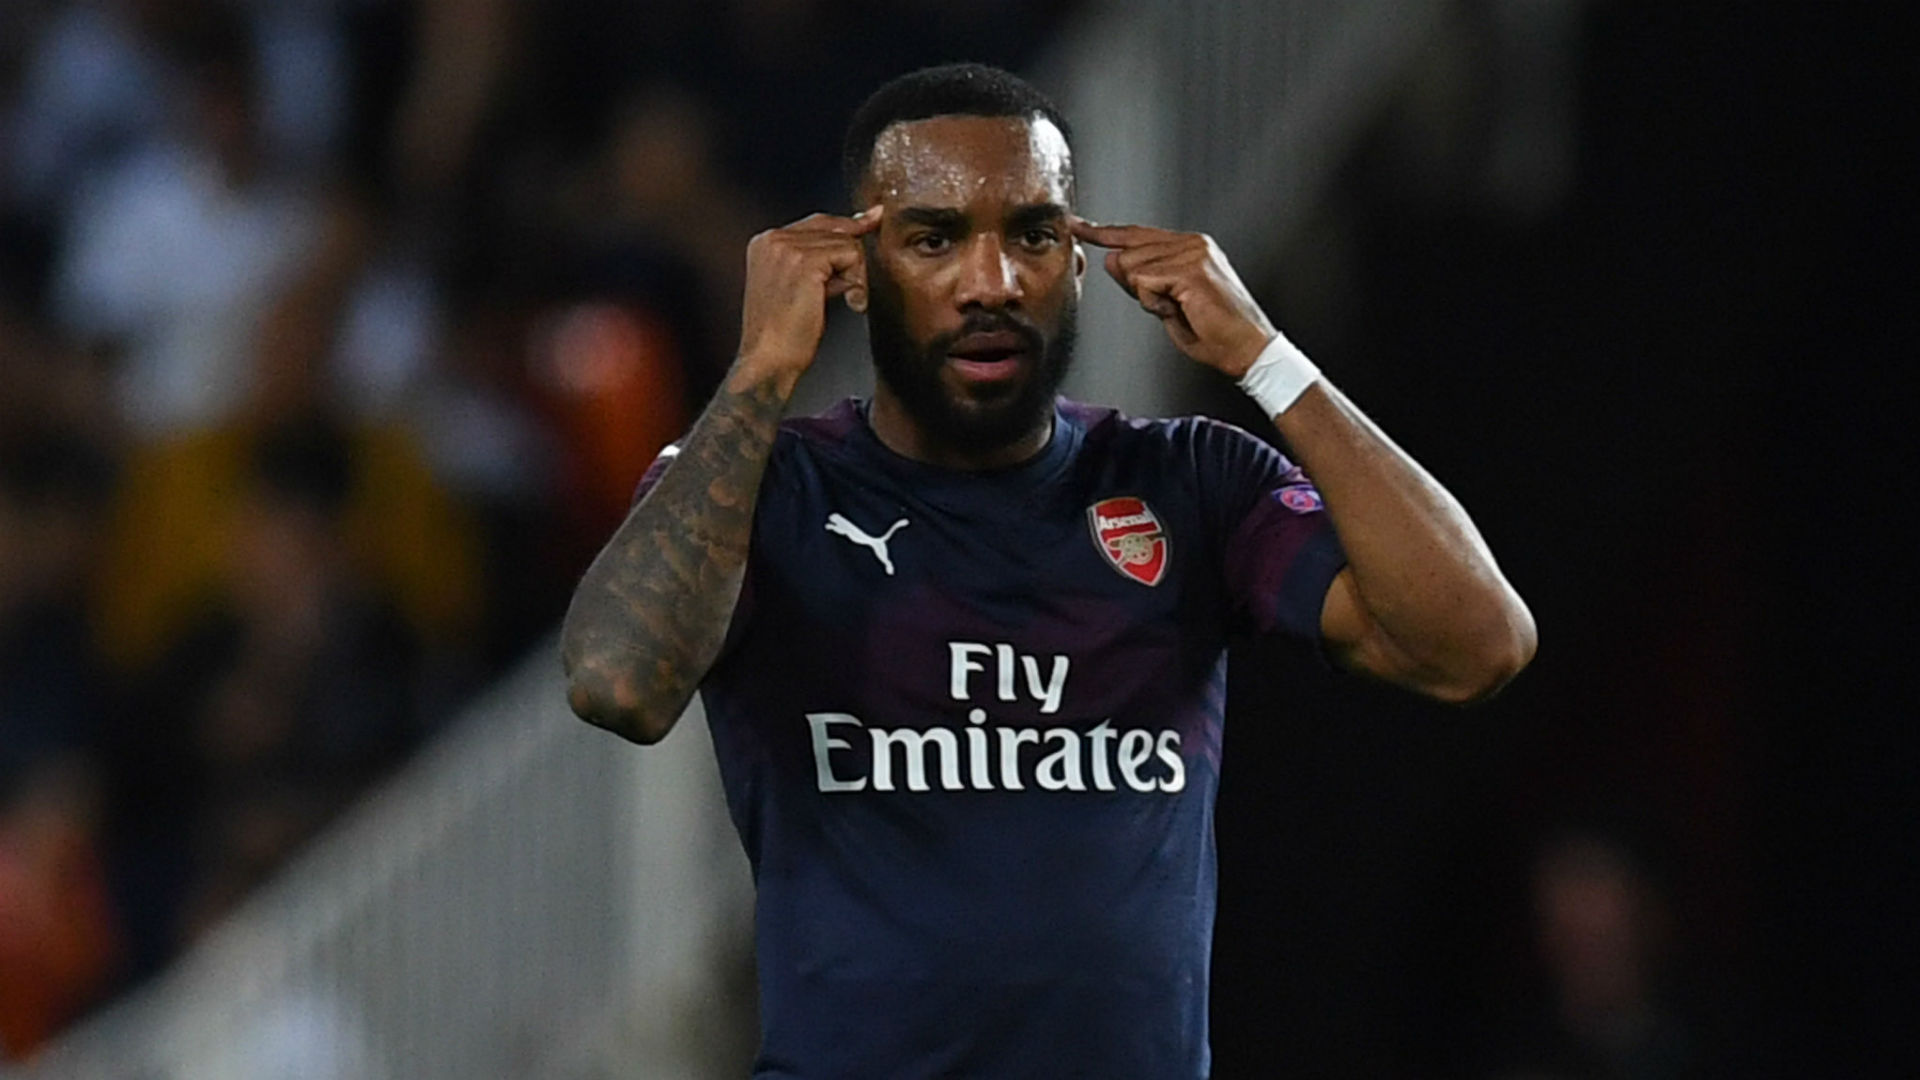 Alexandre Lacazette won Arsenal's Player of the Year award and feels he has never been in greater form.